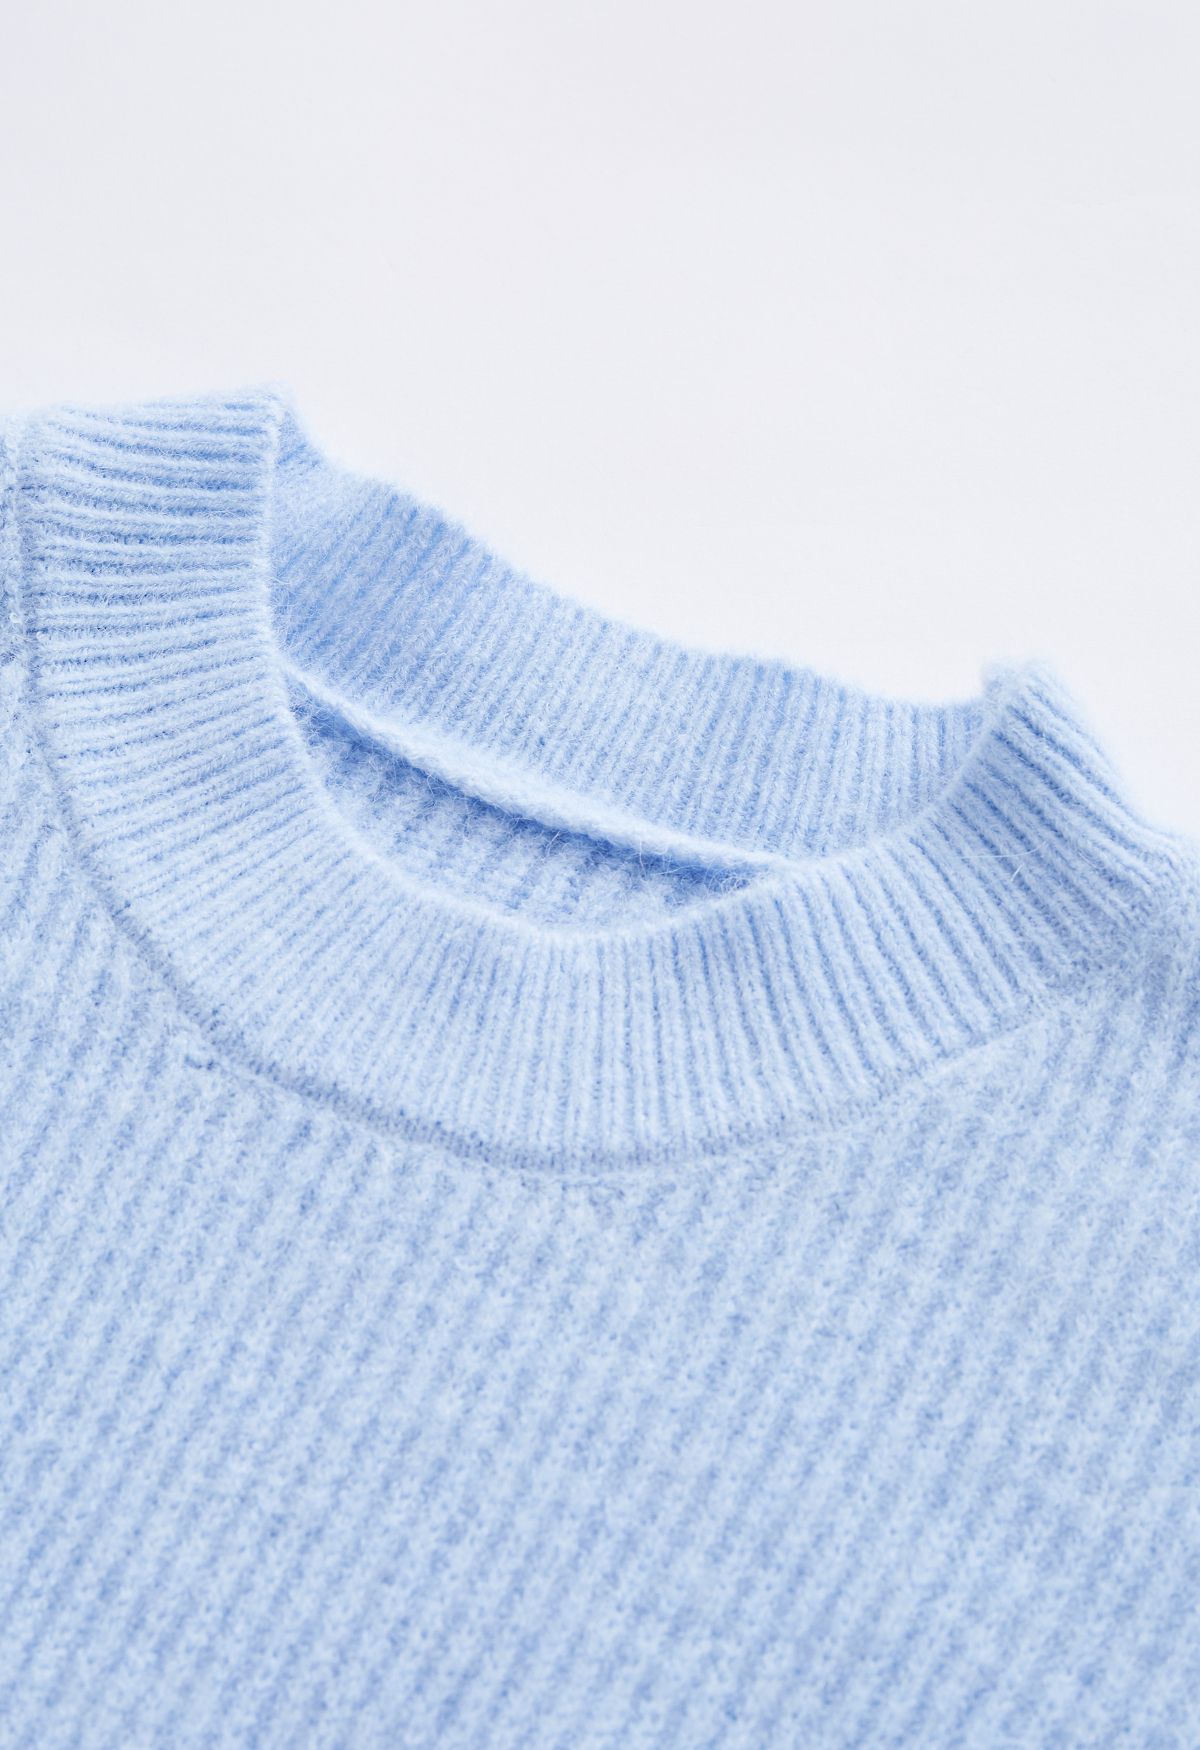 Ombre Round Neck Rib Knit Sweater in Blue